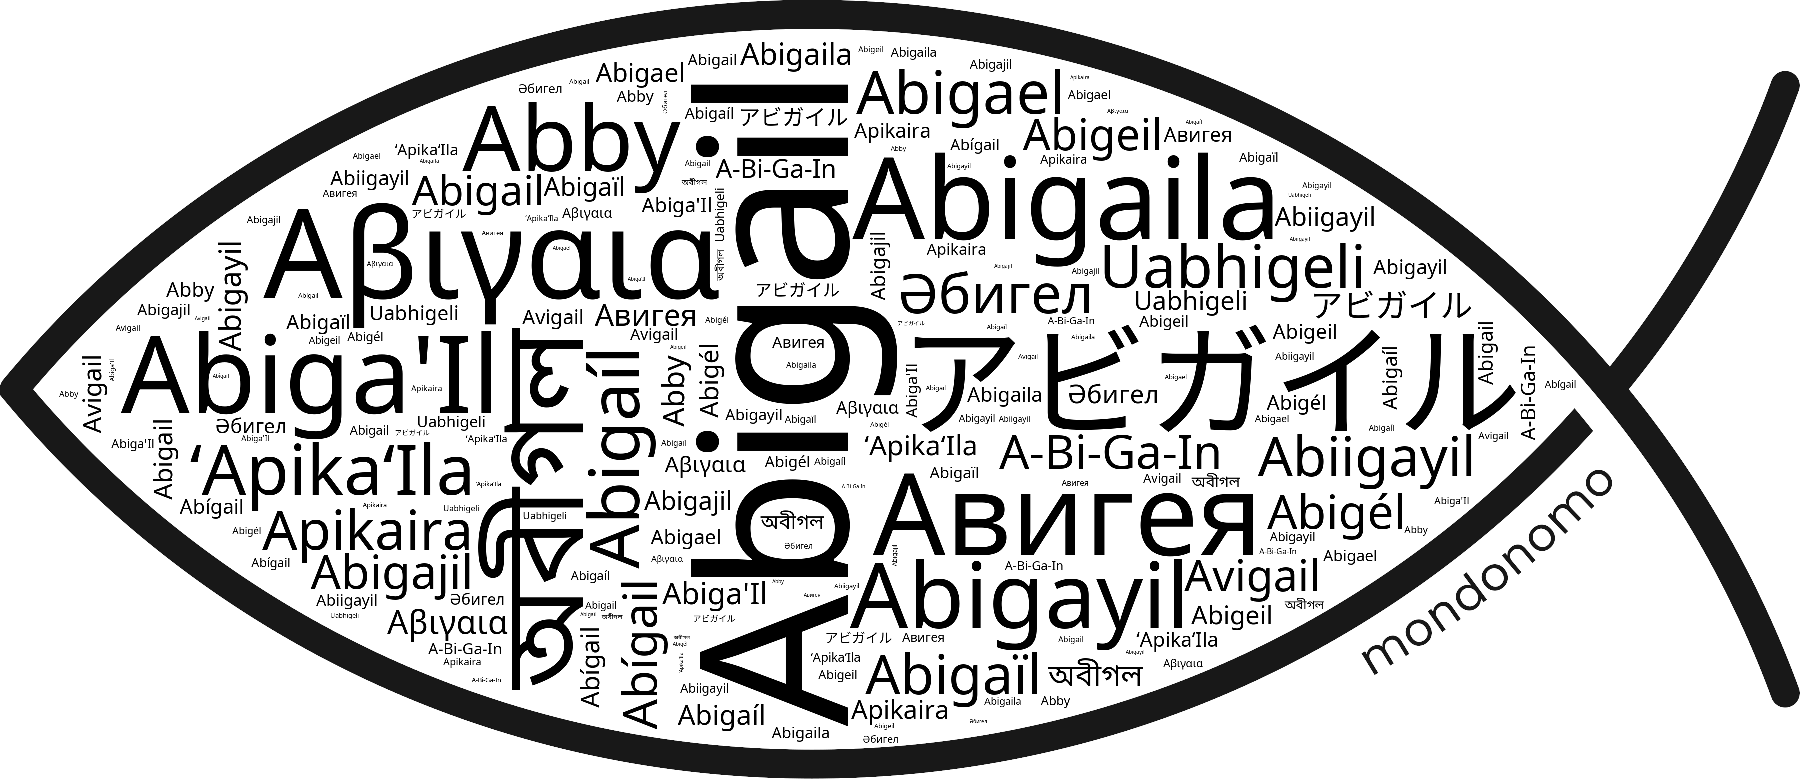 Name Abigail in the world's Bibles